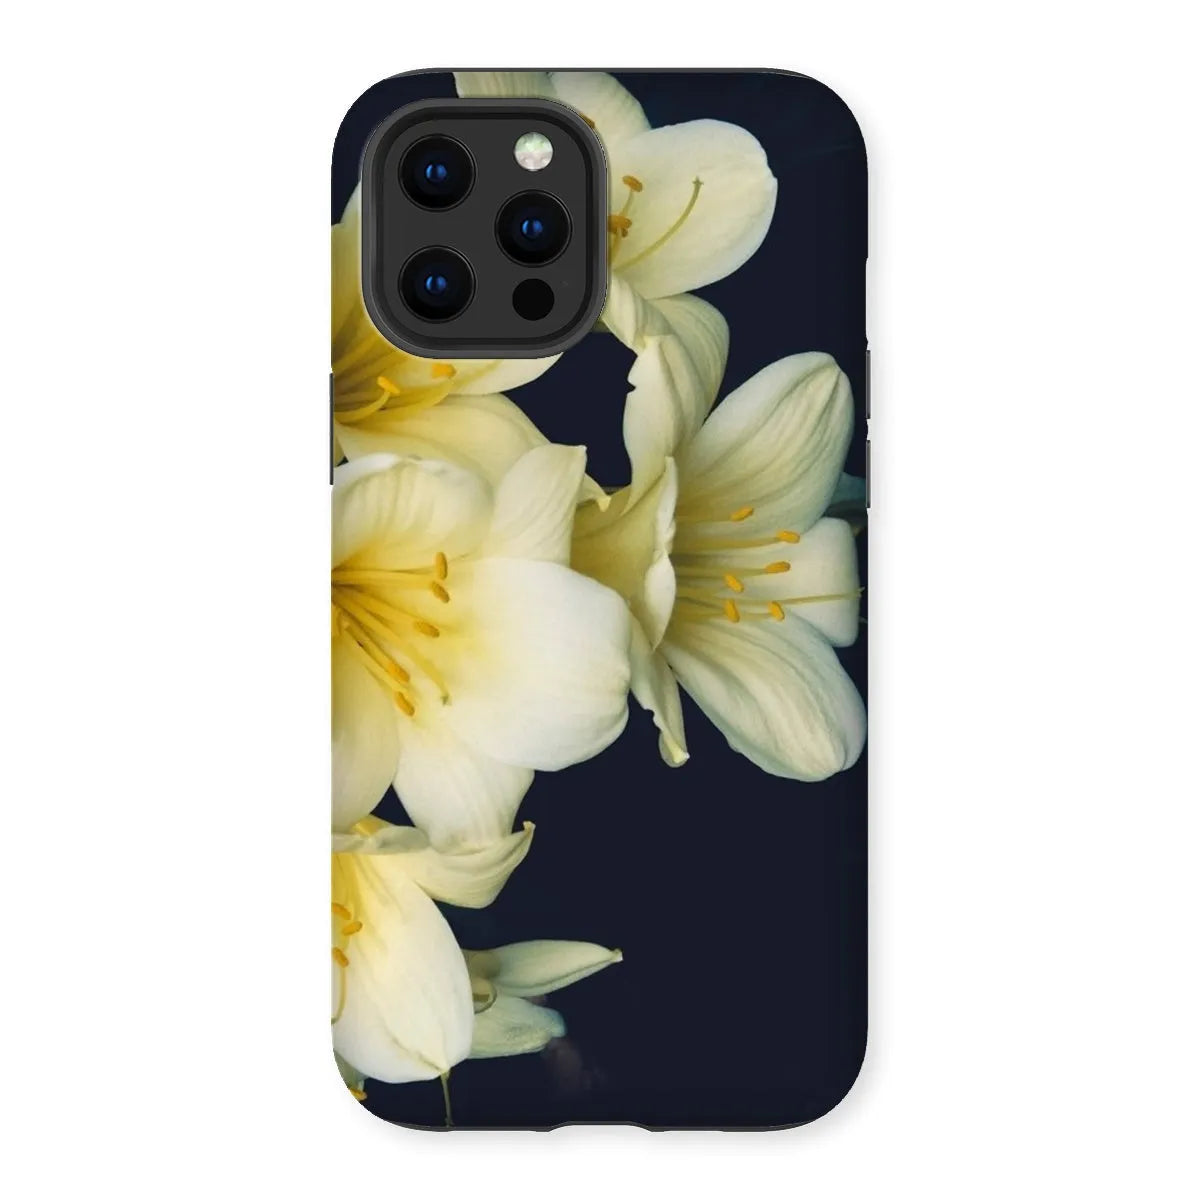 Flower Power Too Tough Phone Case - Iphone 12 Pro Max / Matte - Mobile Phone Cases - Aesthetic Art